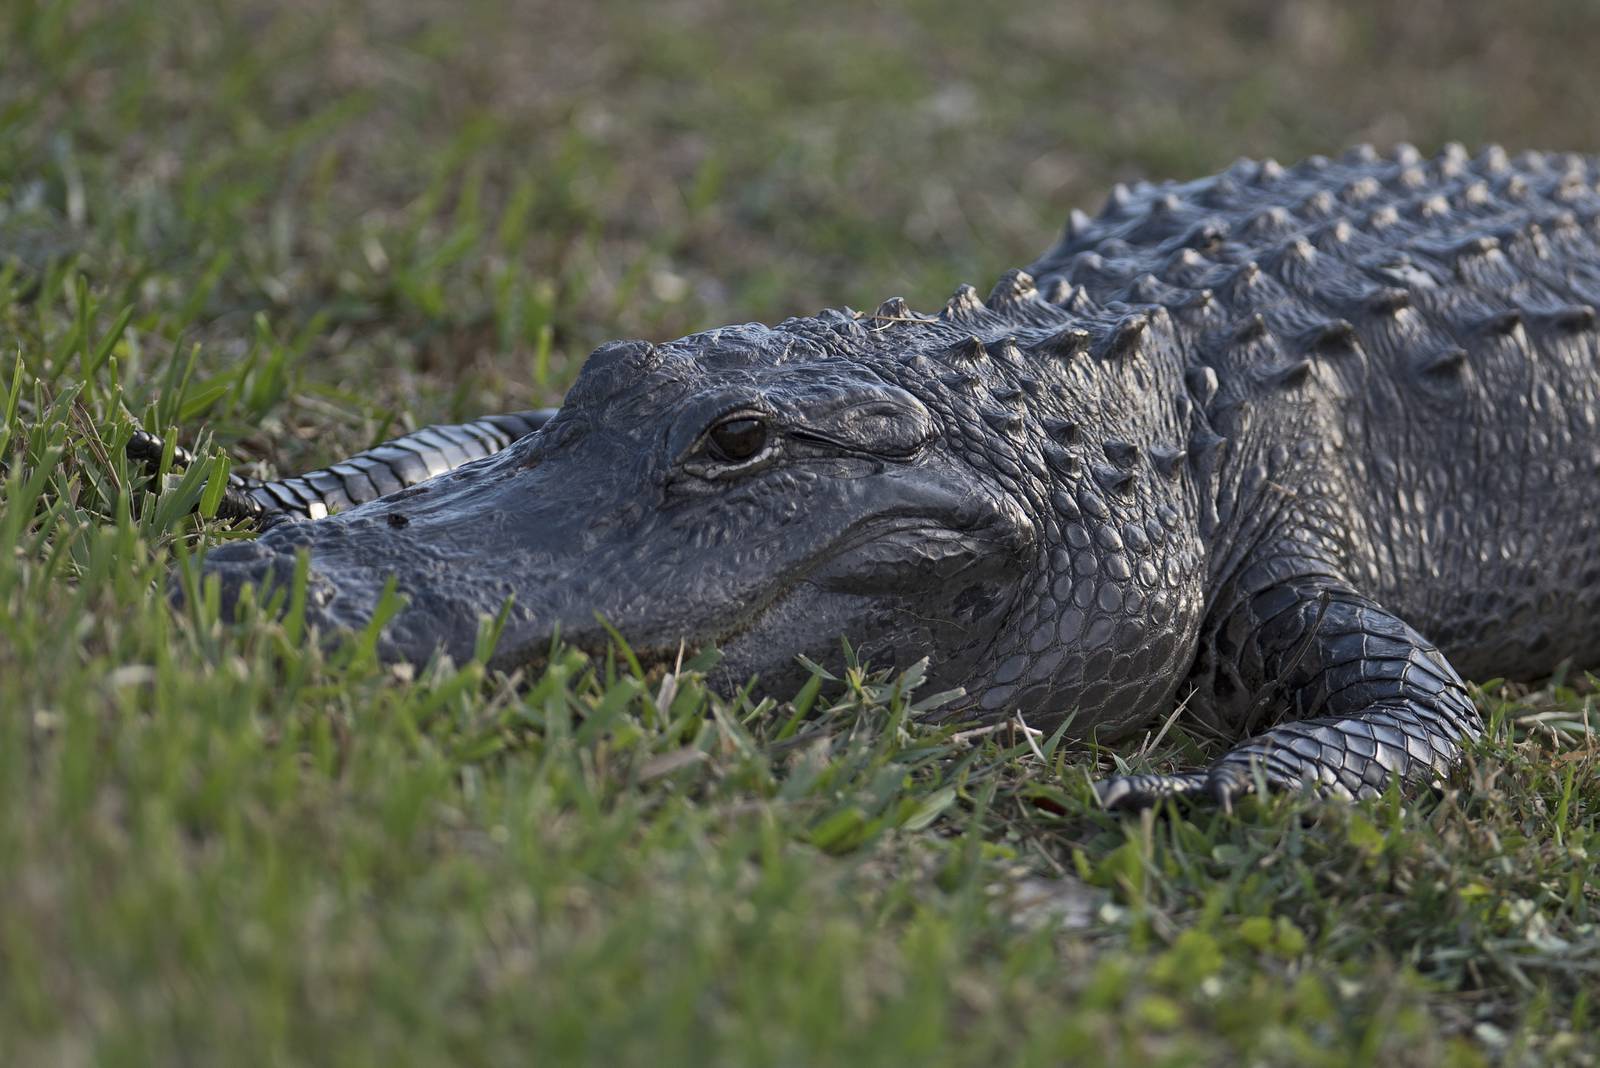 Applications open for Florida alligator harvest permits How to apply